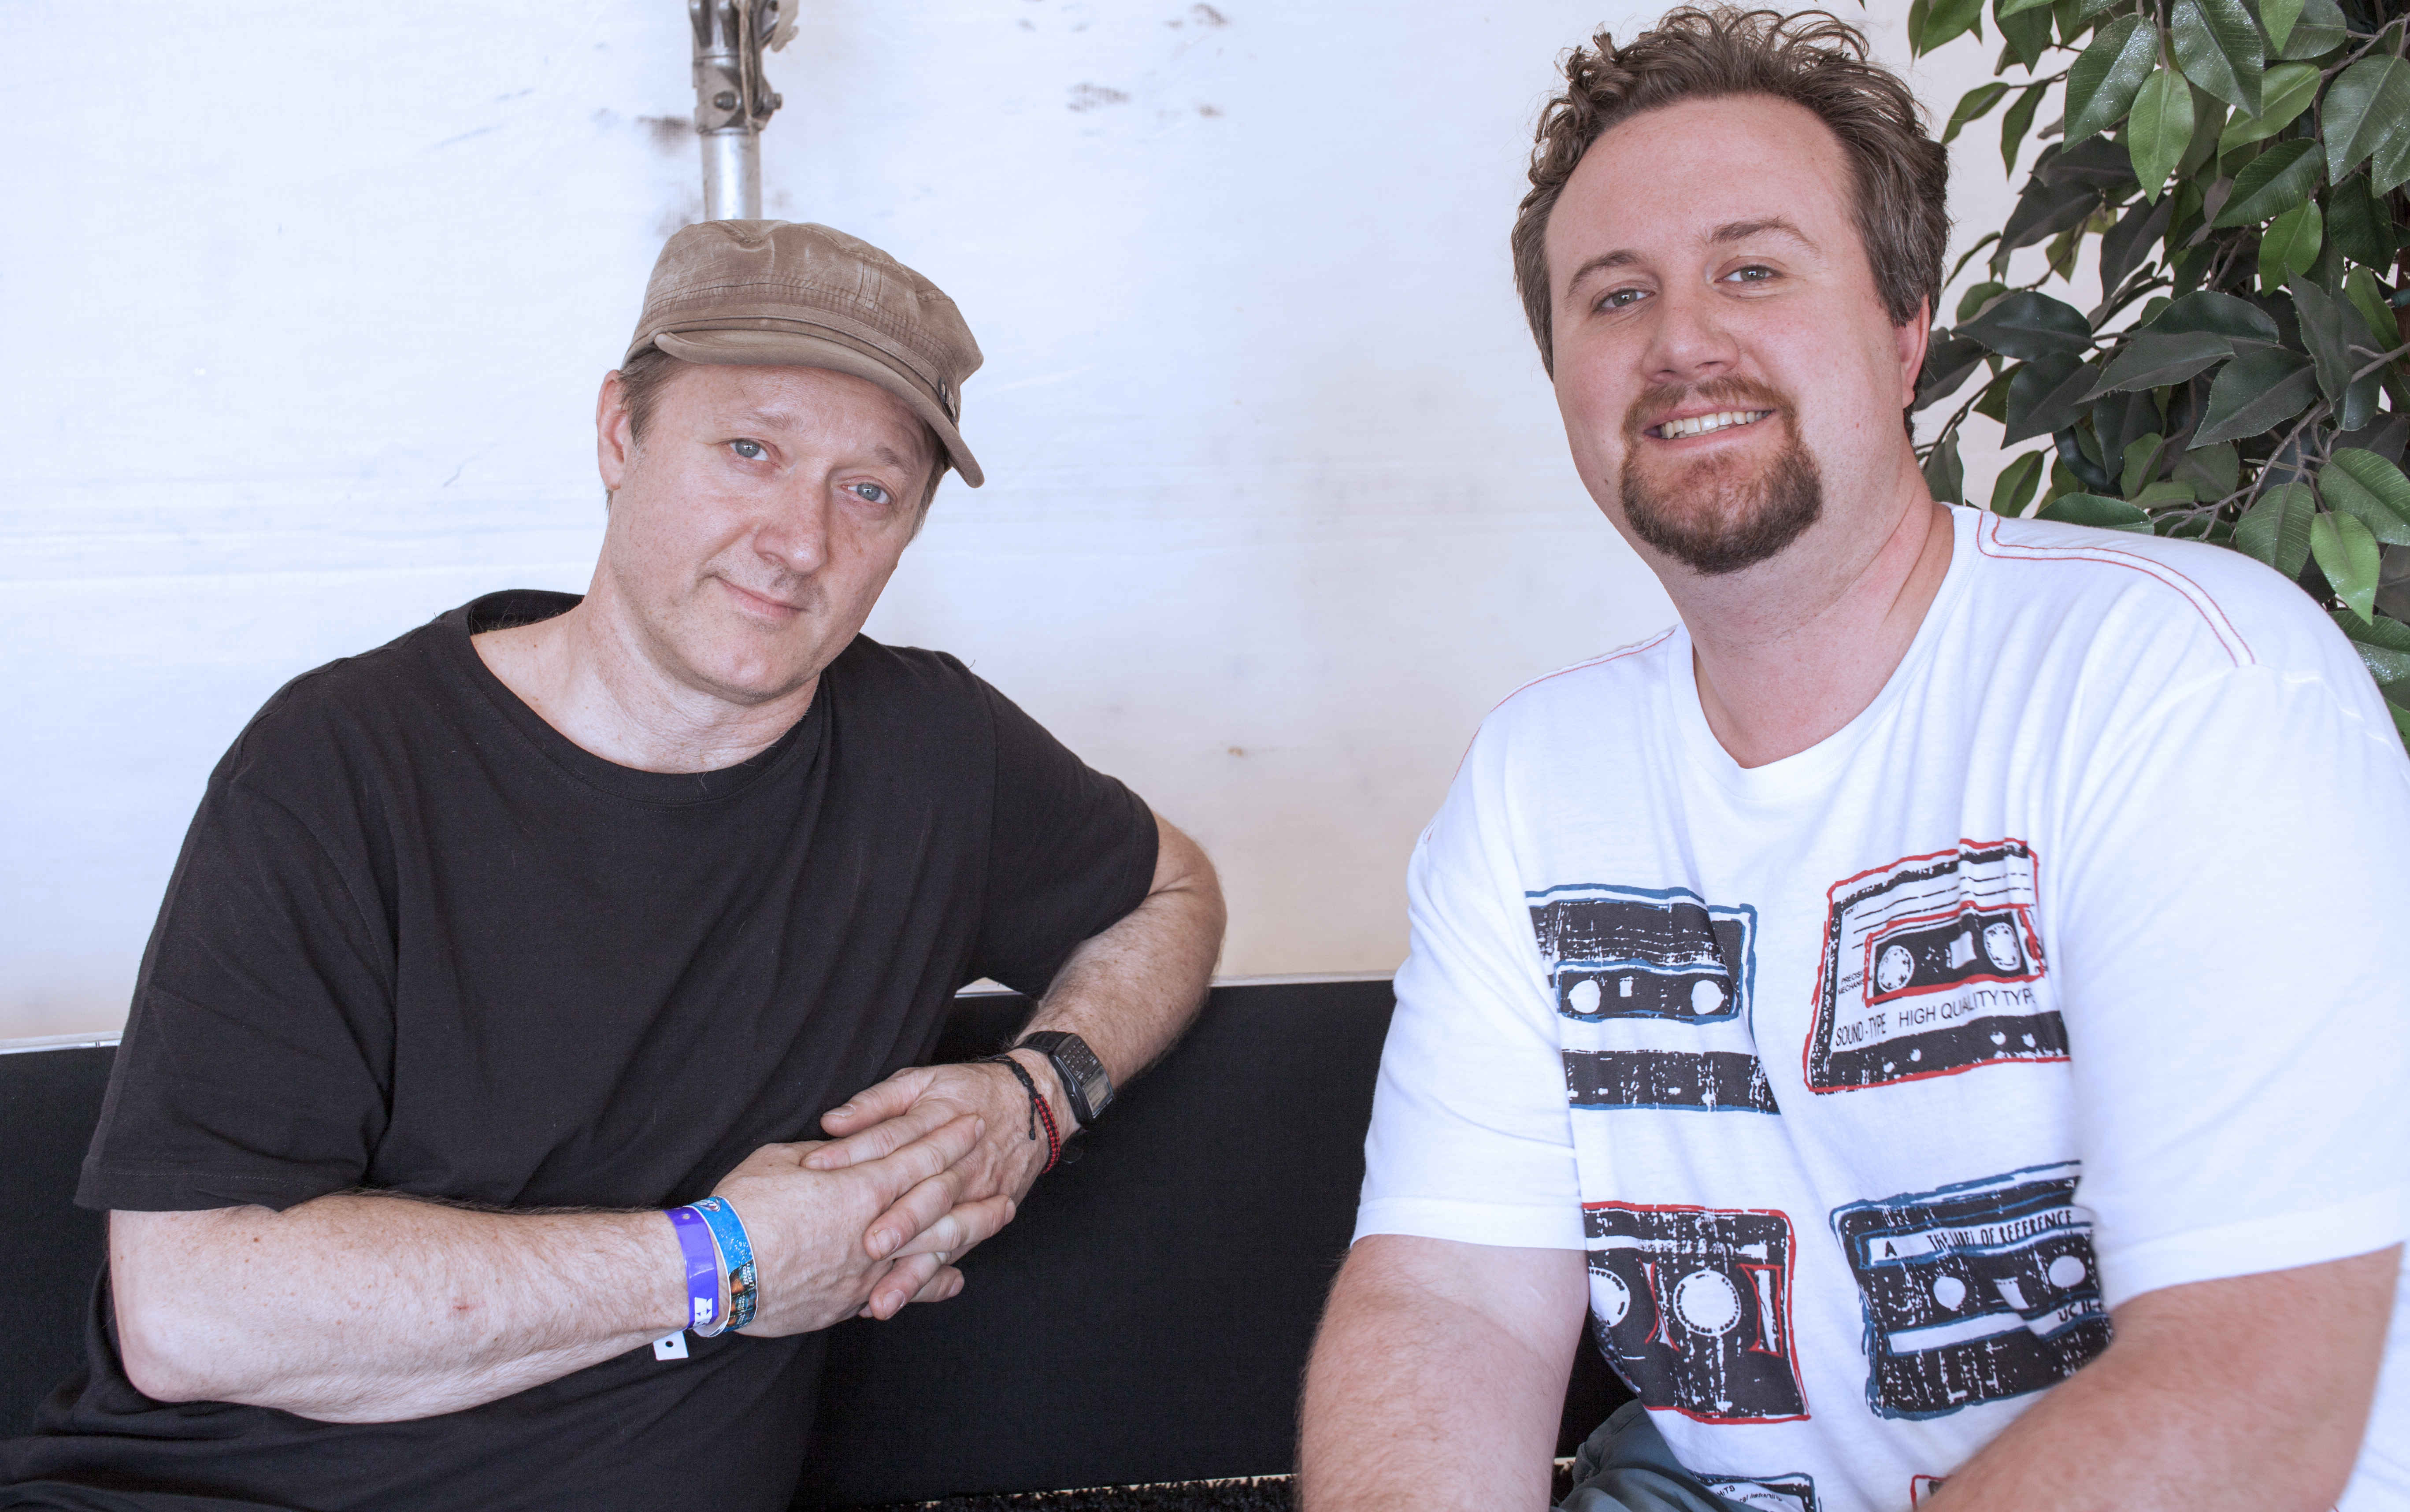 Freddy Fresh (left) and I sat down for a chat at Soundset 2014